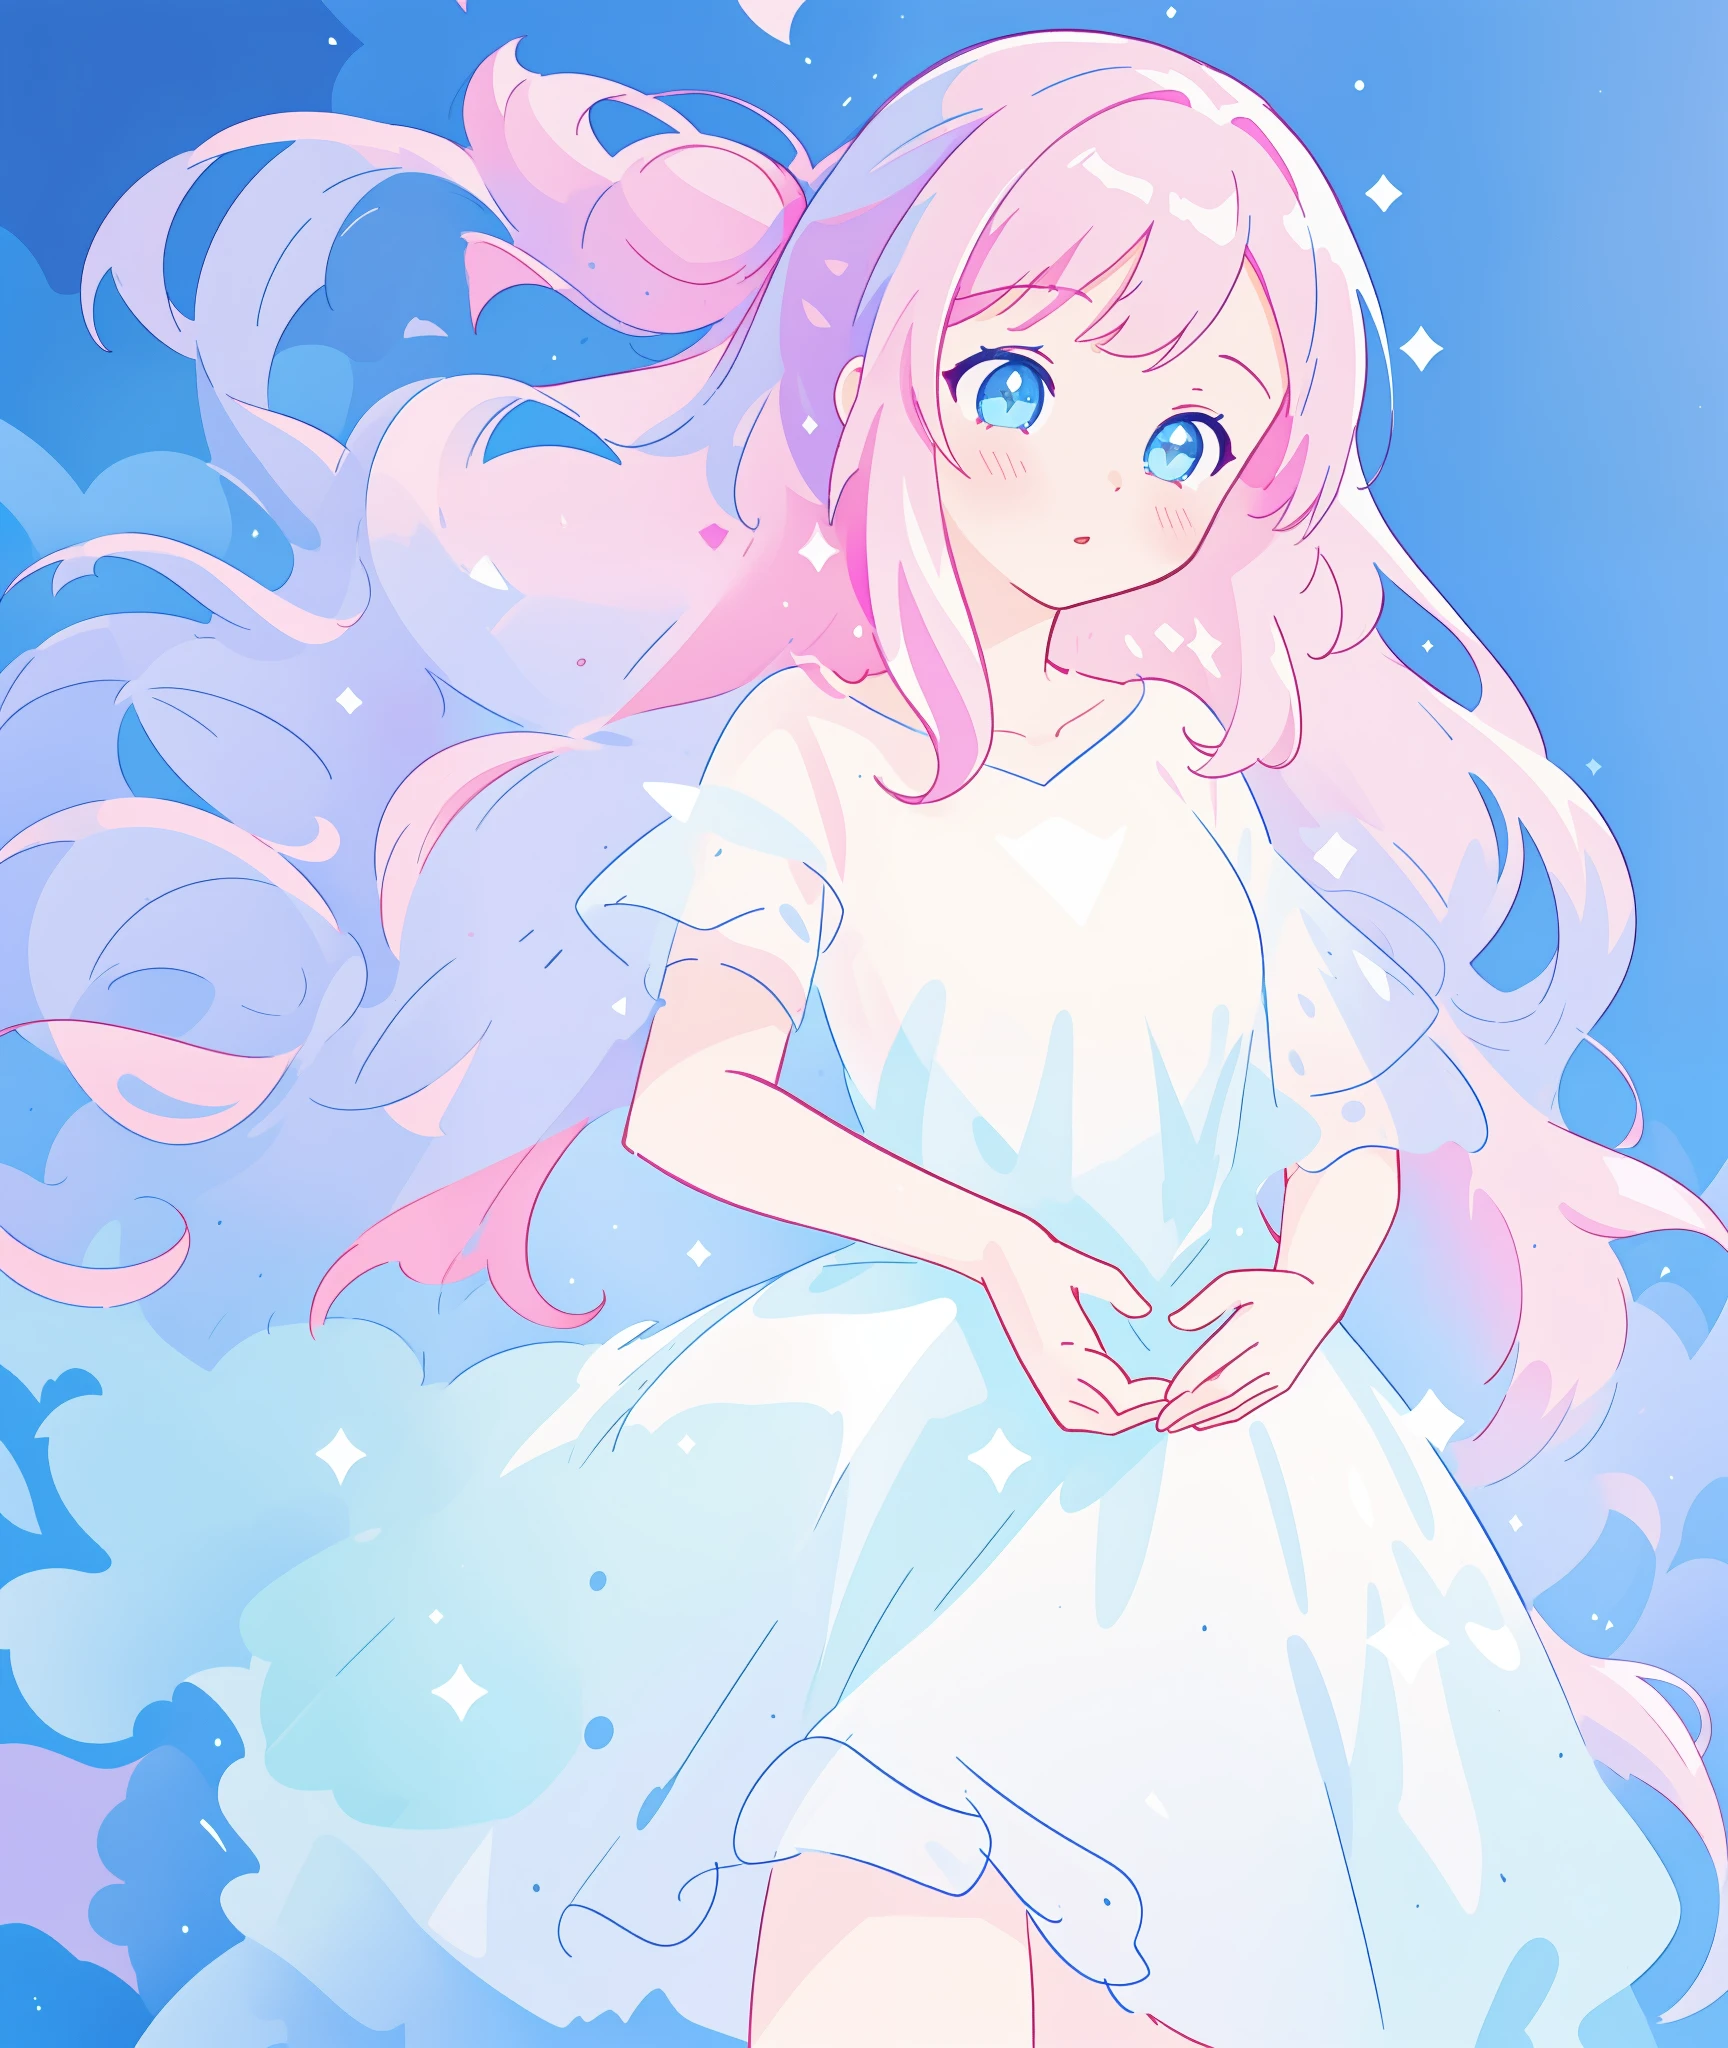 beautiful girl,  white ballgown, vibrant pastel colors, (colorful), long flowing liquid pink hair, magical lights, sparkling magical liquid, inspired by Glen Keane, inspired by Lois van Baarle, disney art style, by Lois van Baarle, glowing aura around her, by Glen Keane, jen bartel, glowing lights! digital painting, flowing glowing hair, glowing flowing hair, beautiful digital illustration, fantasia background, whimsical, magical, fantasy, ((masterpiece, best quality)), intricate details, highly detailed, sharp focus, 8k resolution, sparkling detailed eyes, liquid watercolor